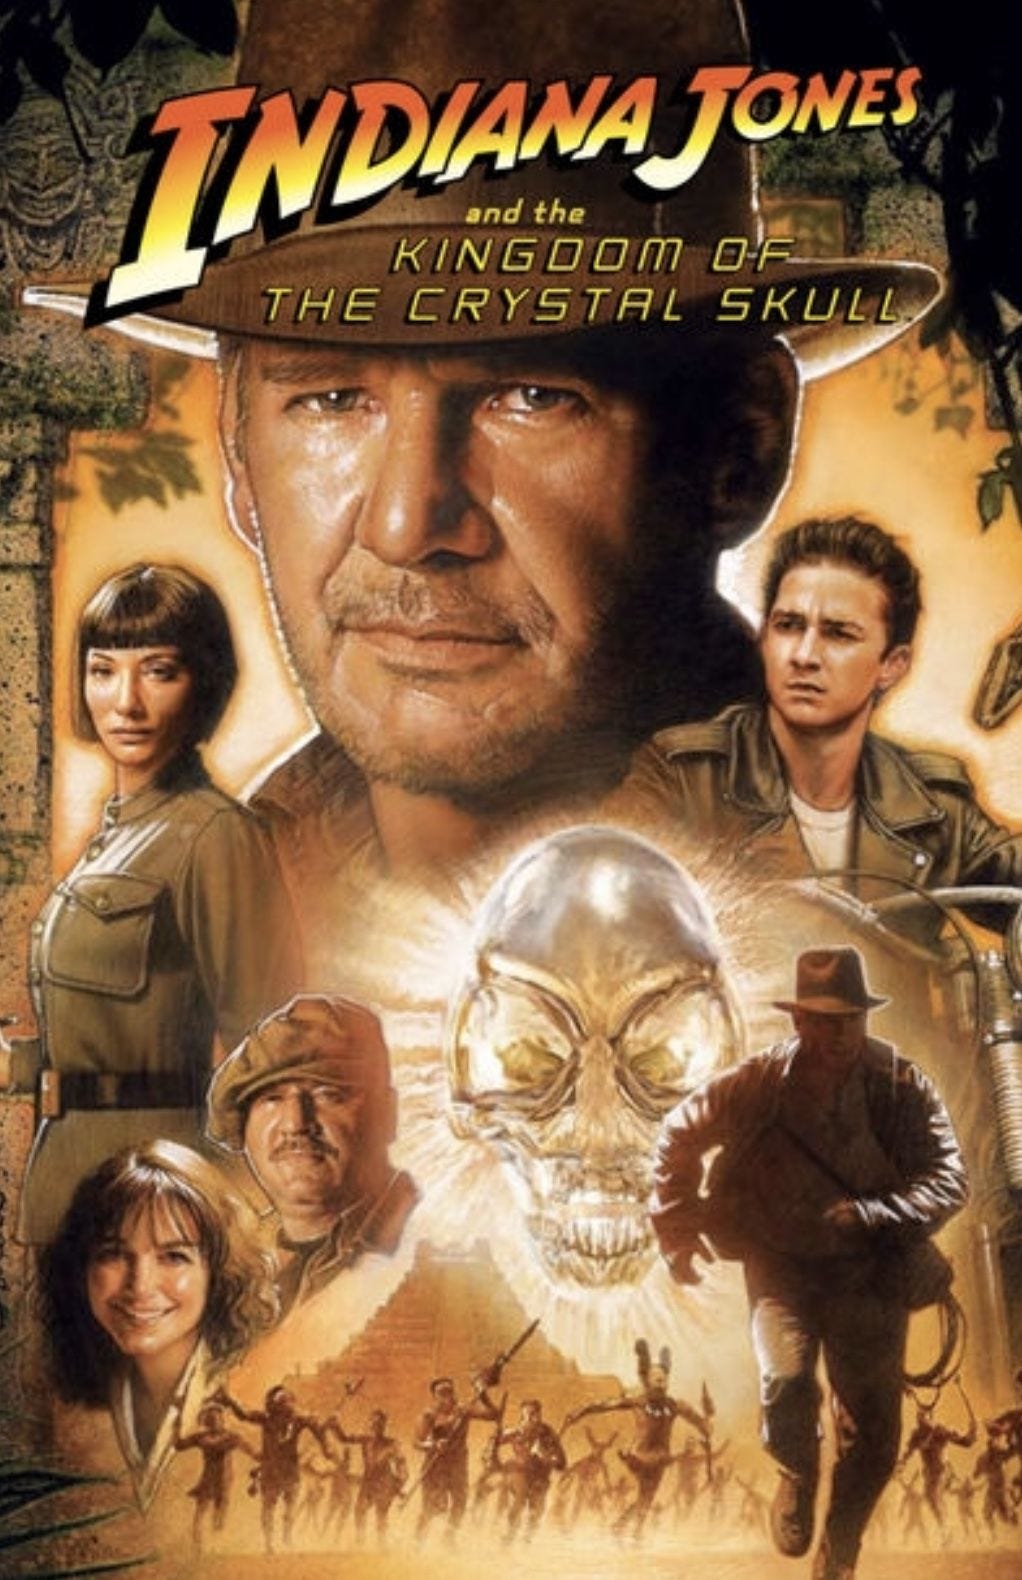 INDIANA JONES AND THE KINGDOM OF THE CRYSTAL SKULL movie poster